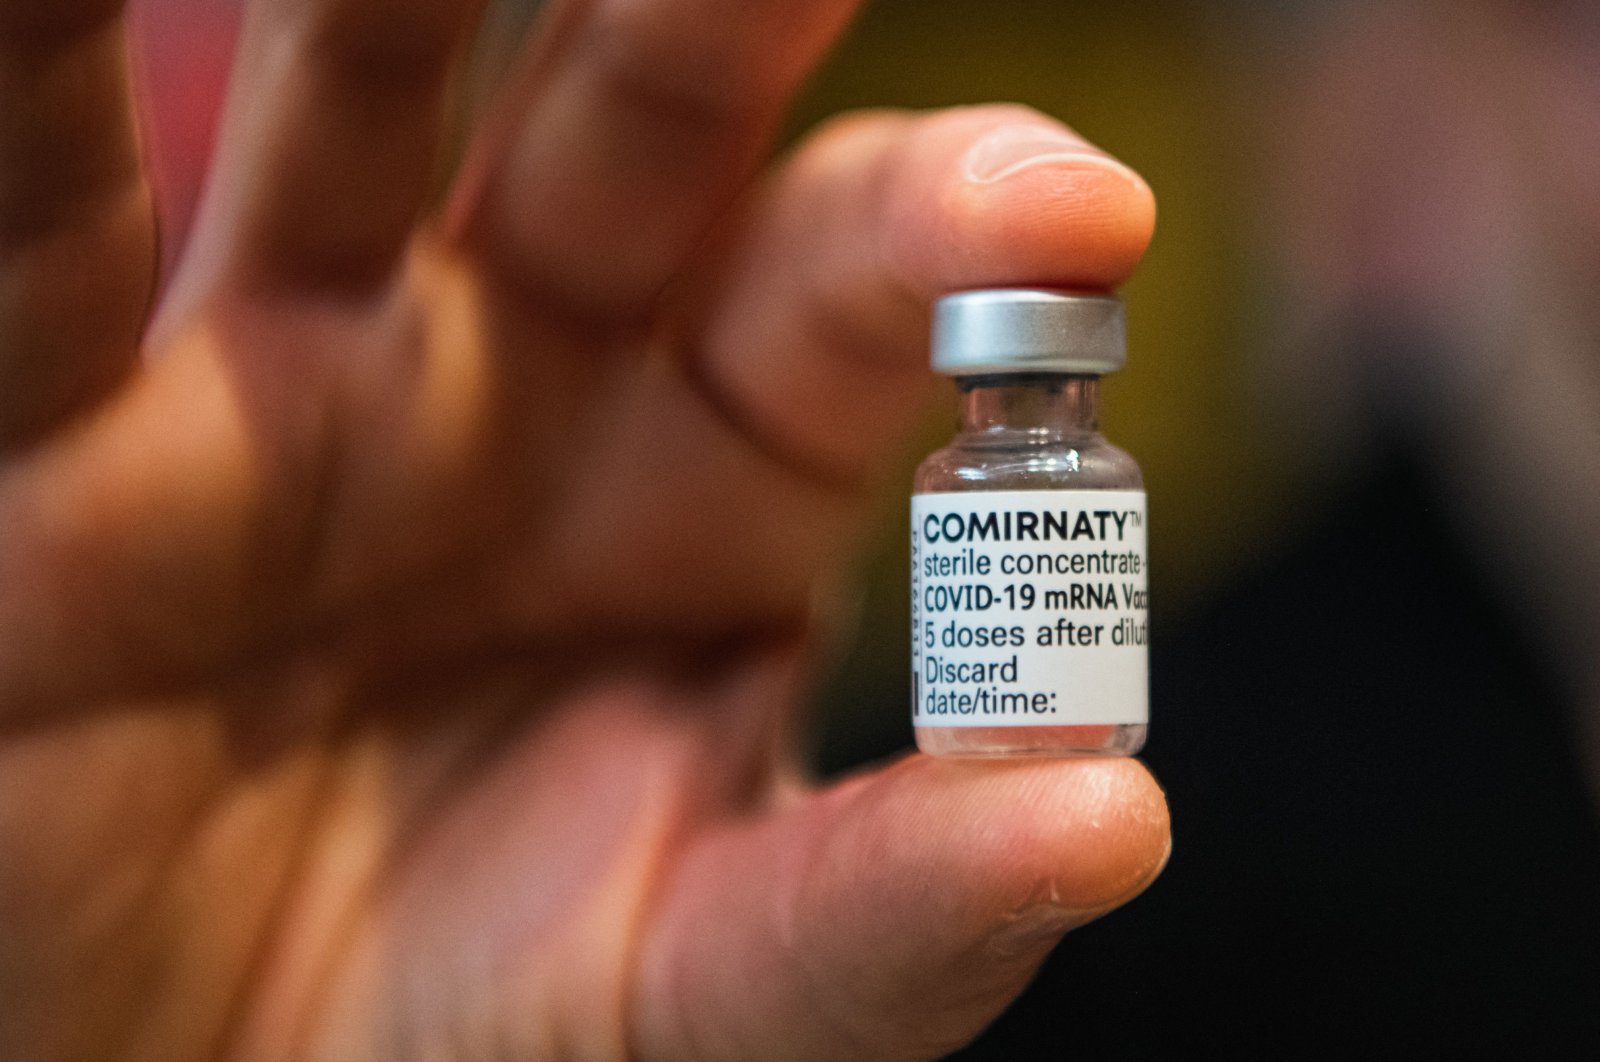 A medical worker holds a vial containing Comirnaty, Pfizer/BioNTech's vaccine against COVID-19 in Stockholm, Sweden on Feb. 21, 2021 (AFP).